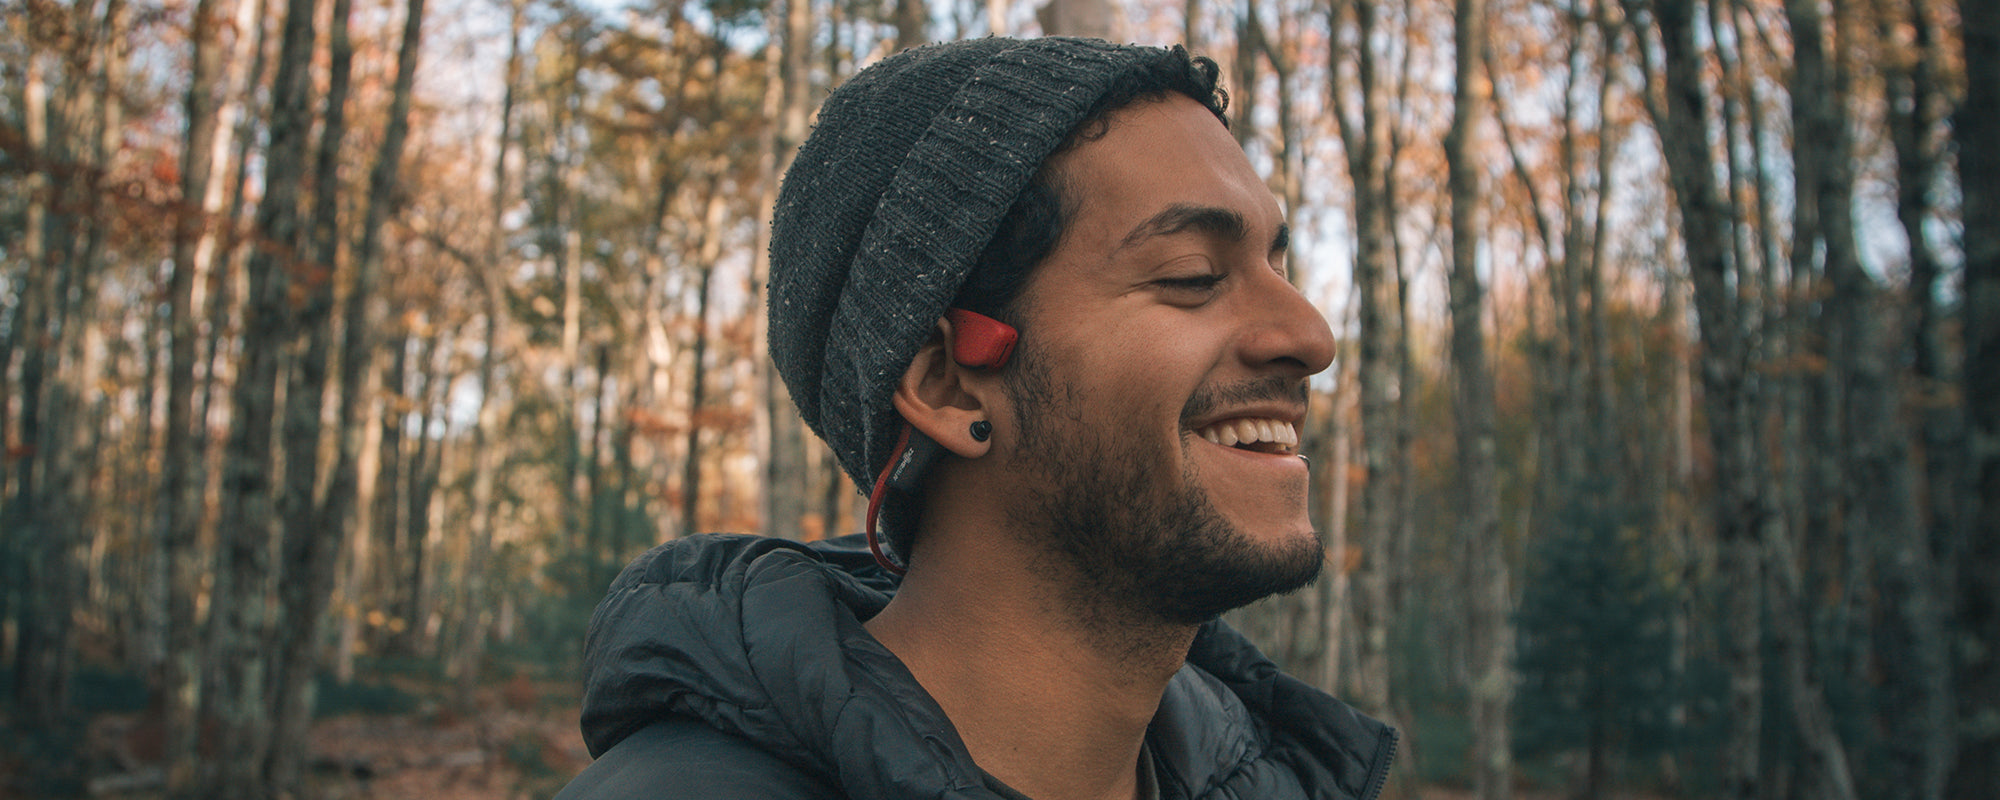 Man outdoors in forrest wearing AfterShokz Air headphones